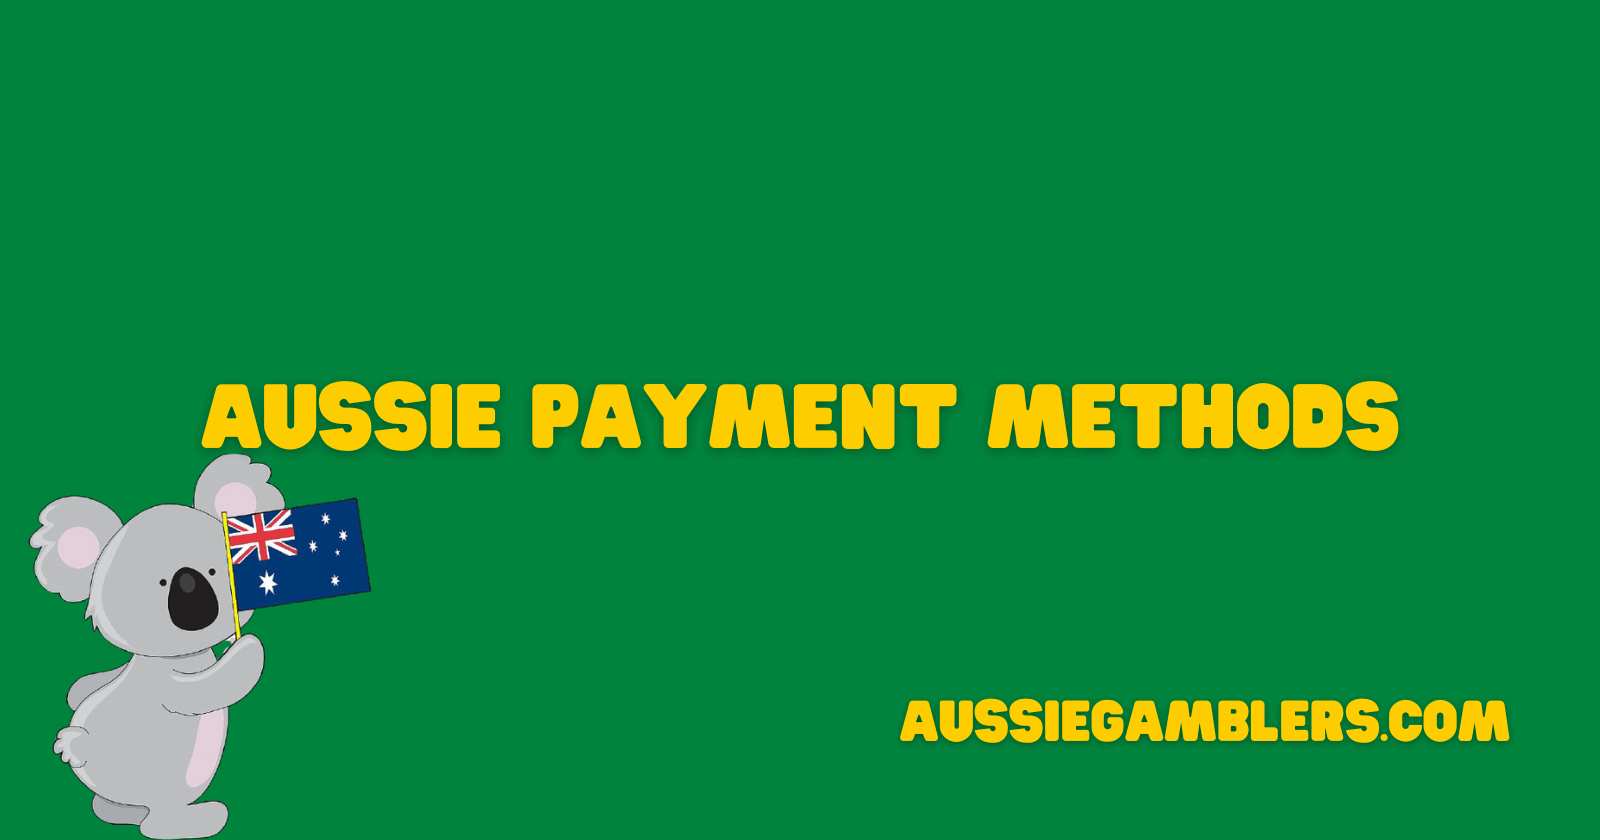 Payment methods banner